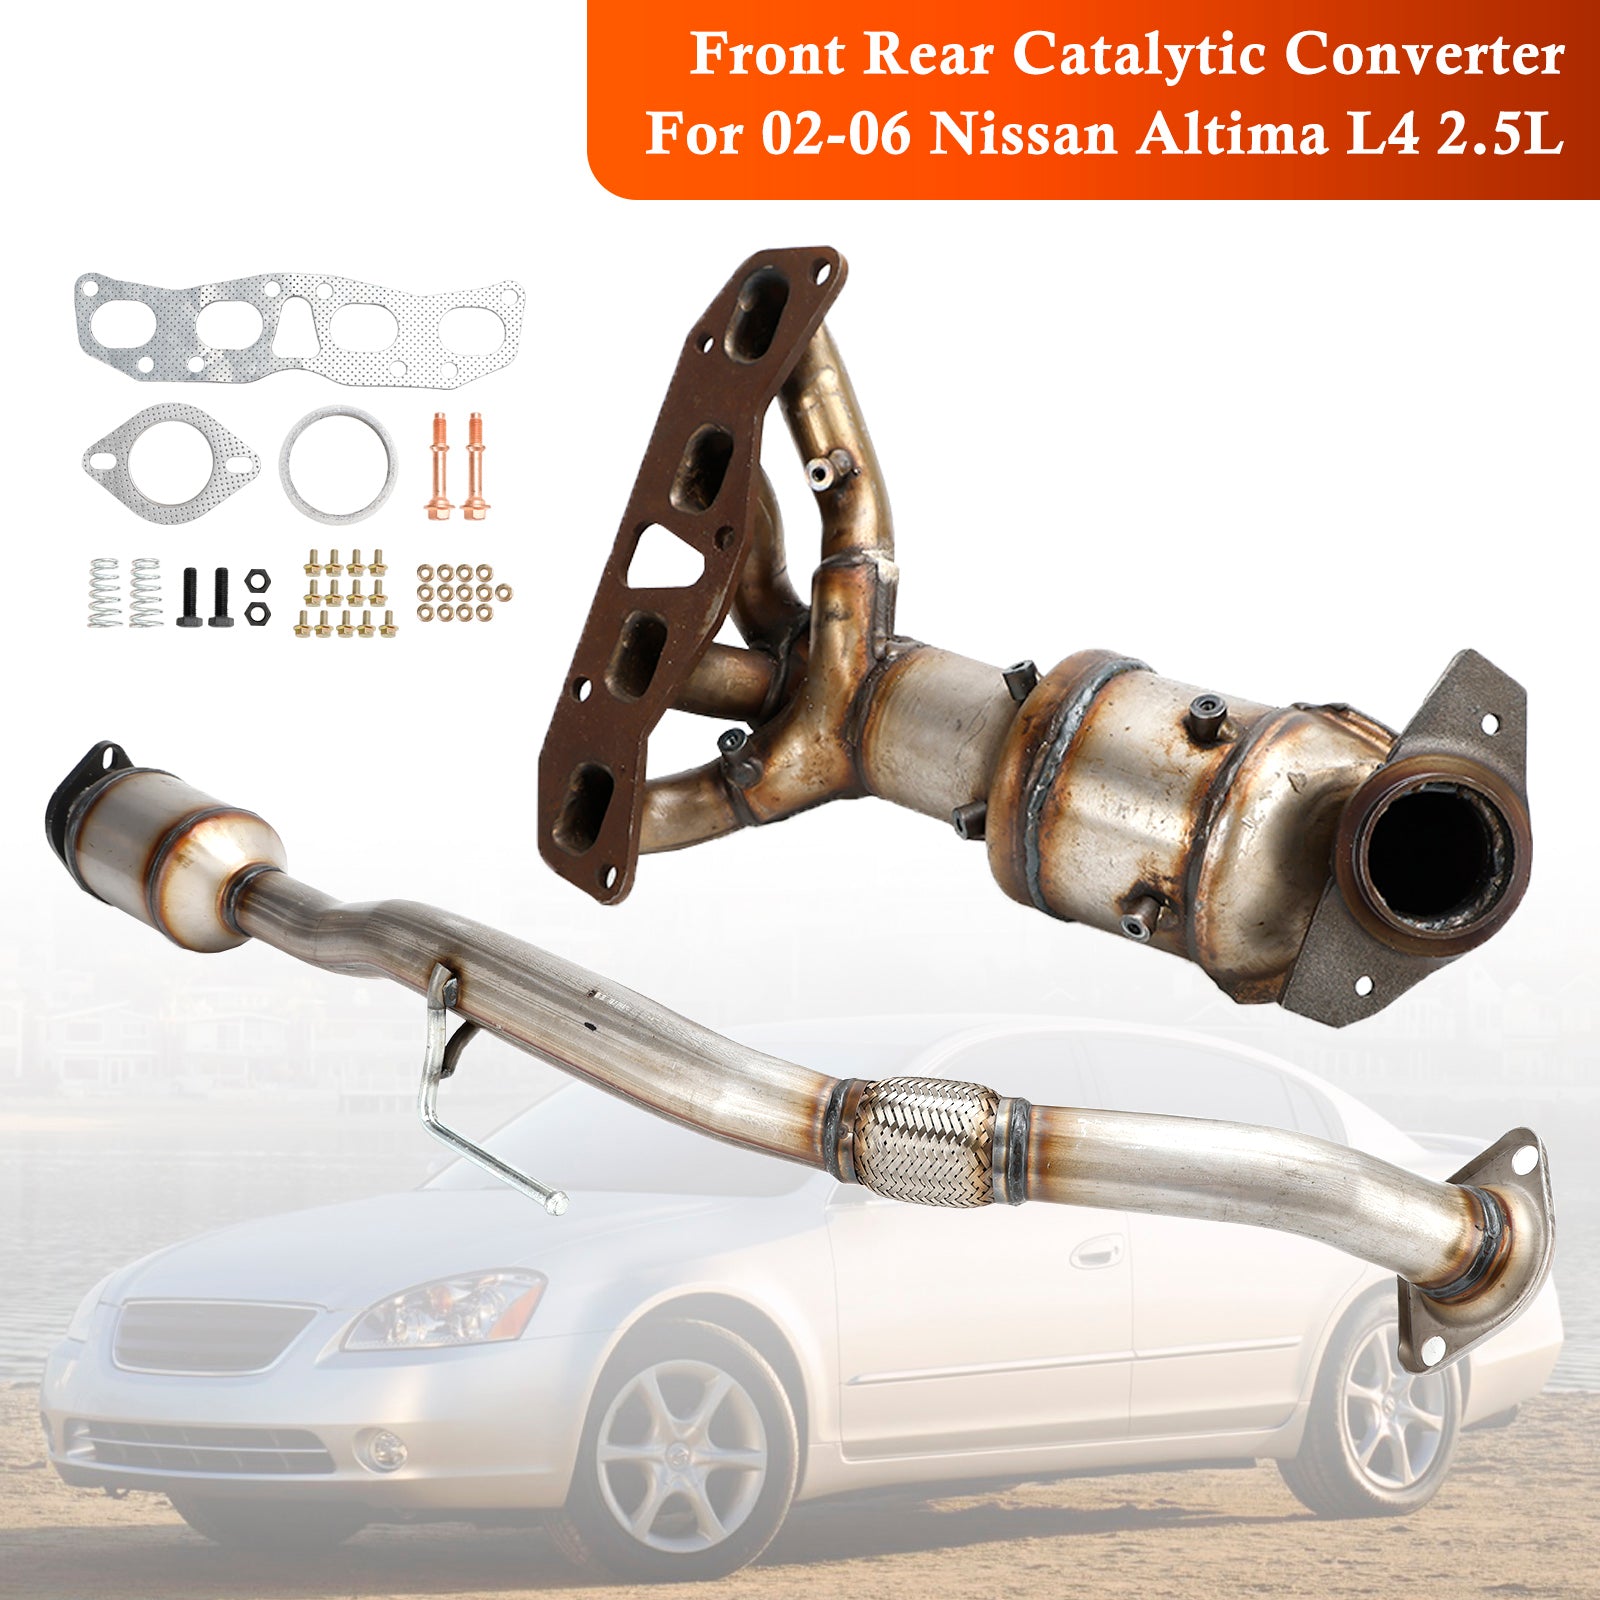 Nissan 2002-2006 Altima 2.5L Direct Pair Front Rear Catalytic Converter